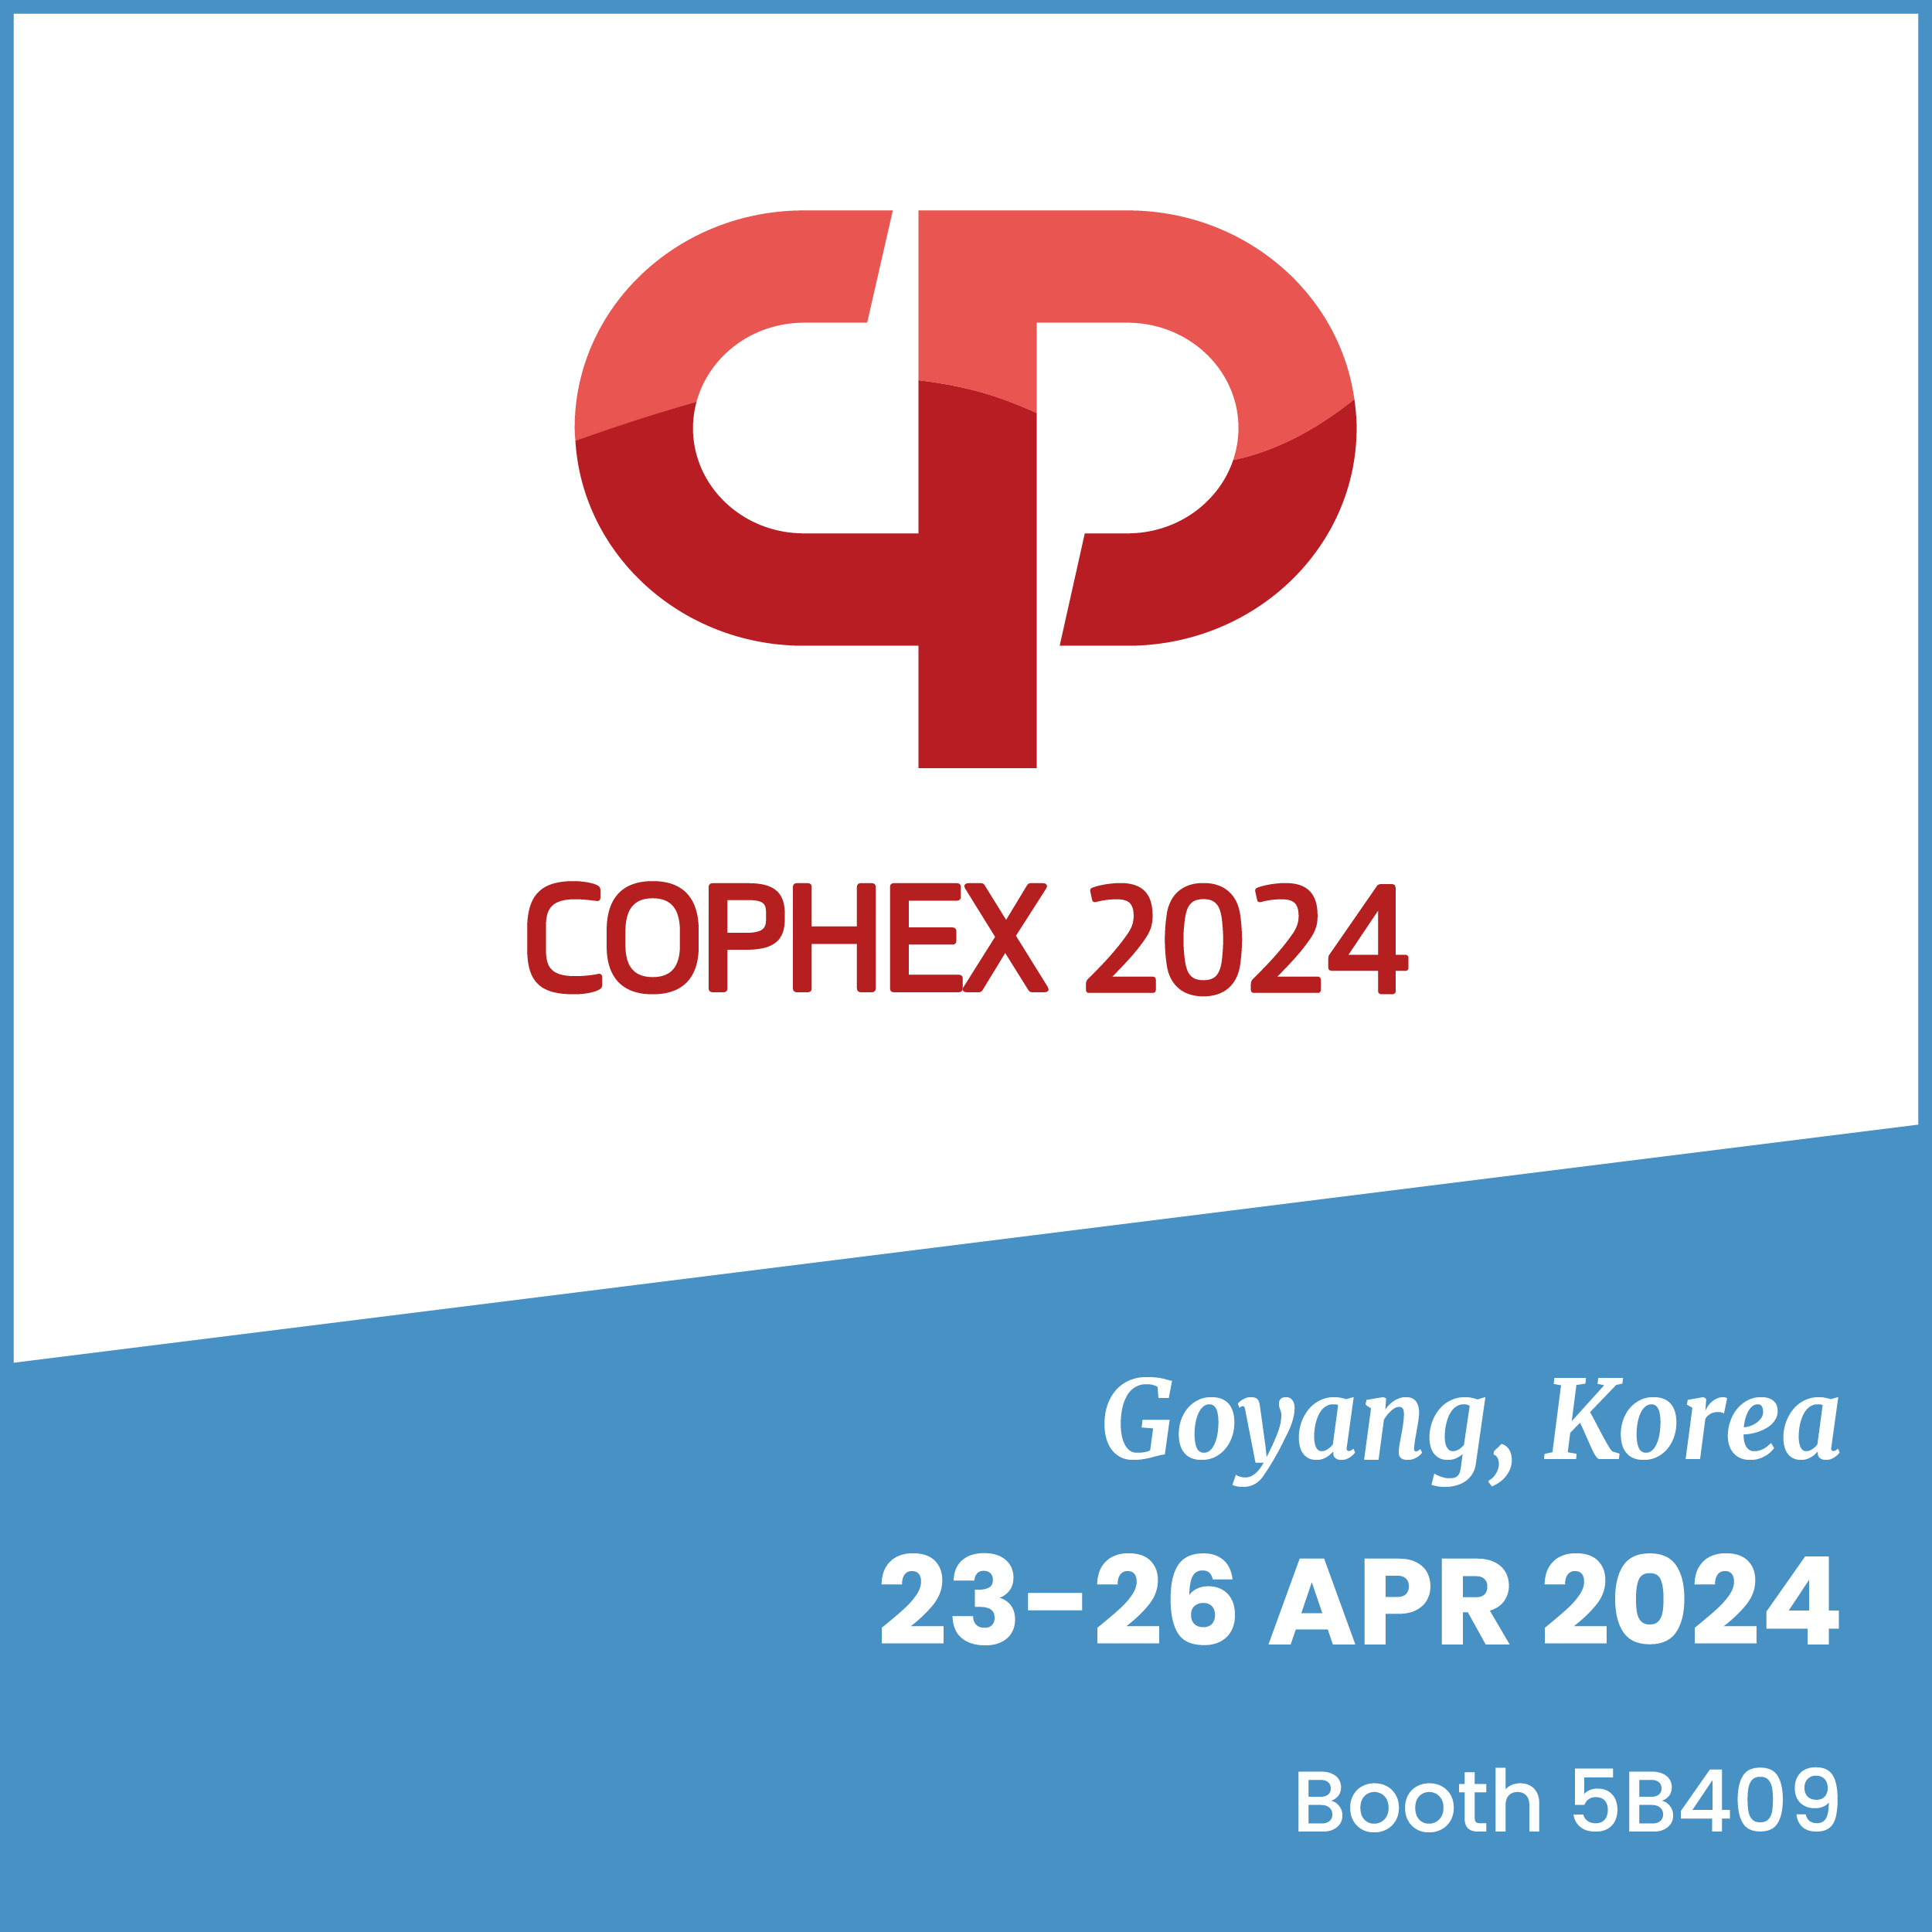 Teaser of COPHEX event in Goyang, Korea. From 23rd to 26th April, 2024